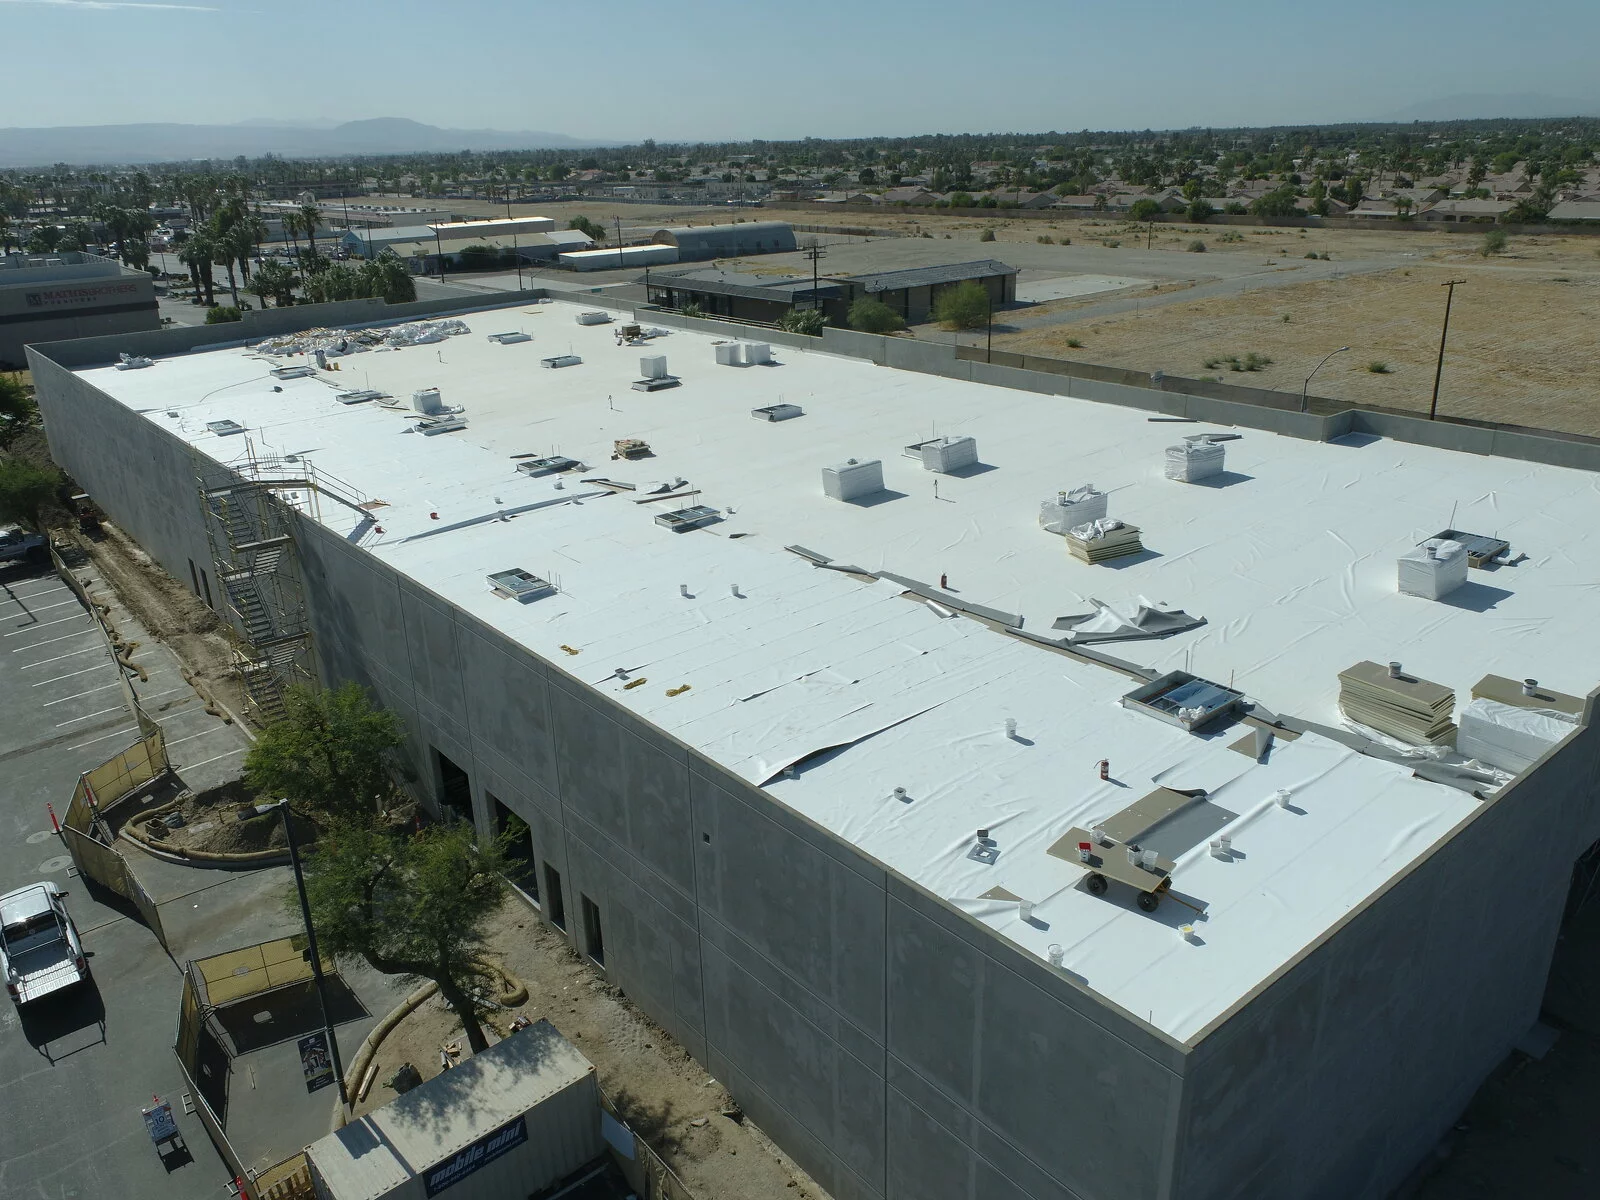 Aerial Exterior of Mathis Brothers Facility, concrete building, building under construction, parking in front, scaffolding, photo taken on a sunny day, trees in the distance.